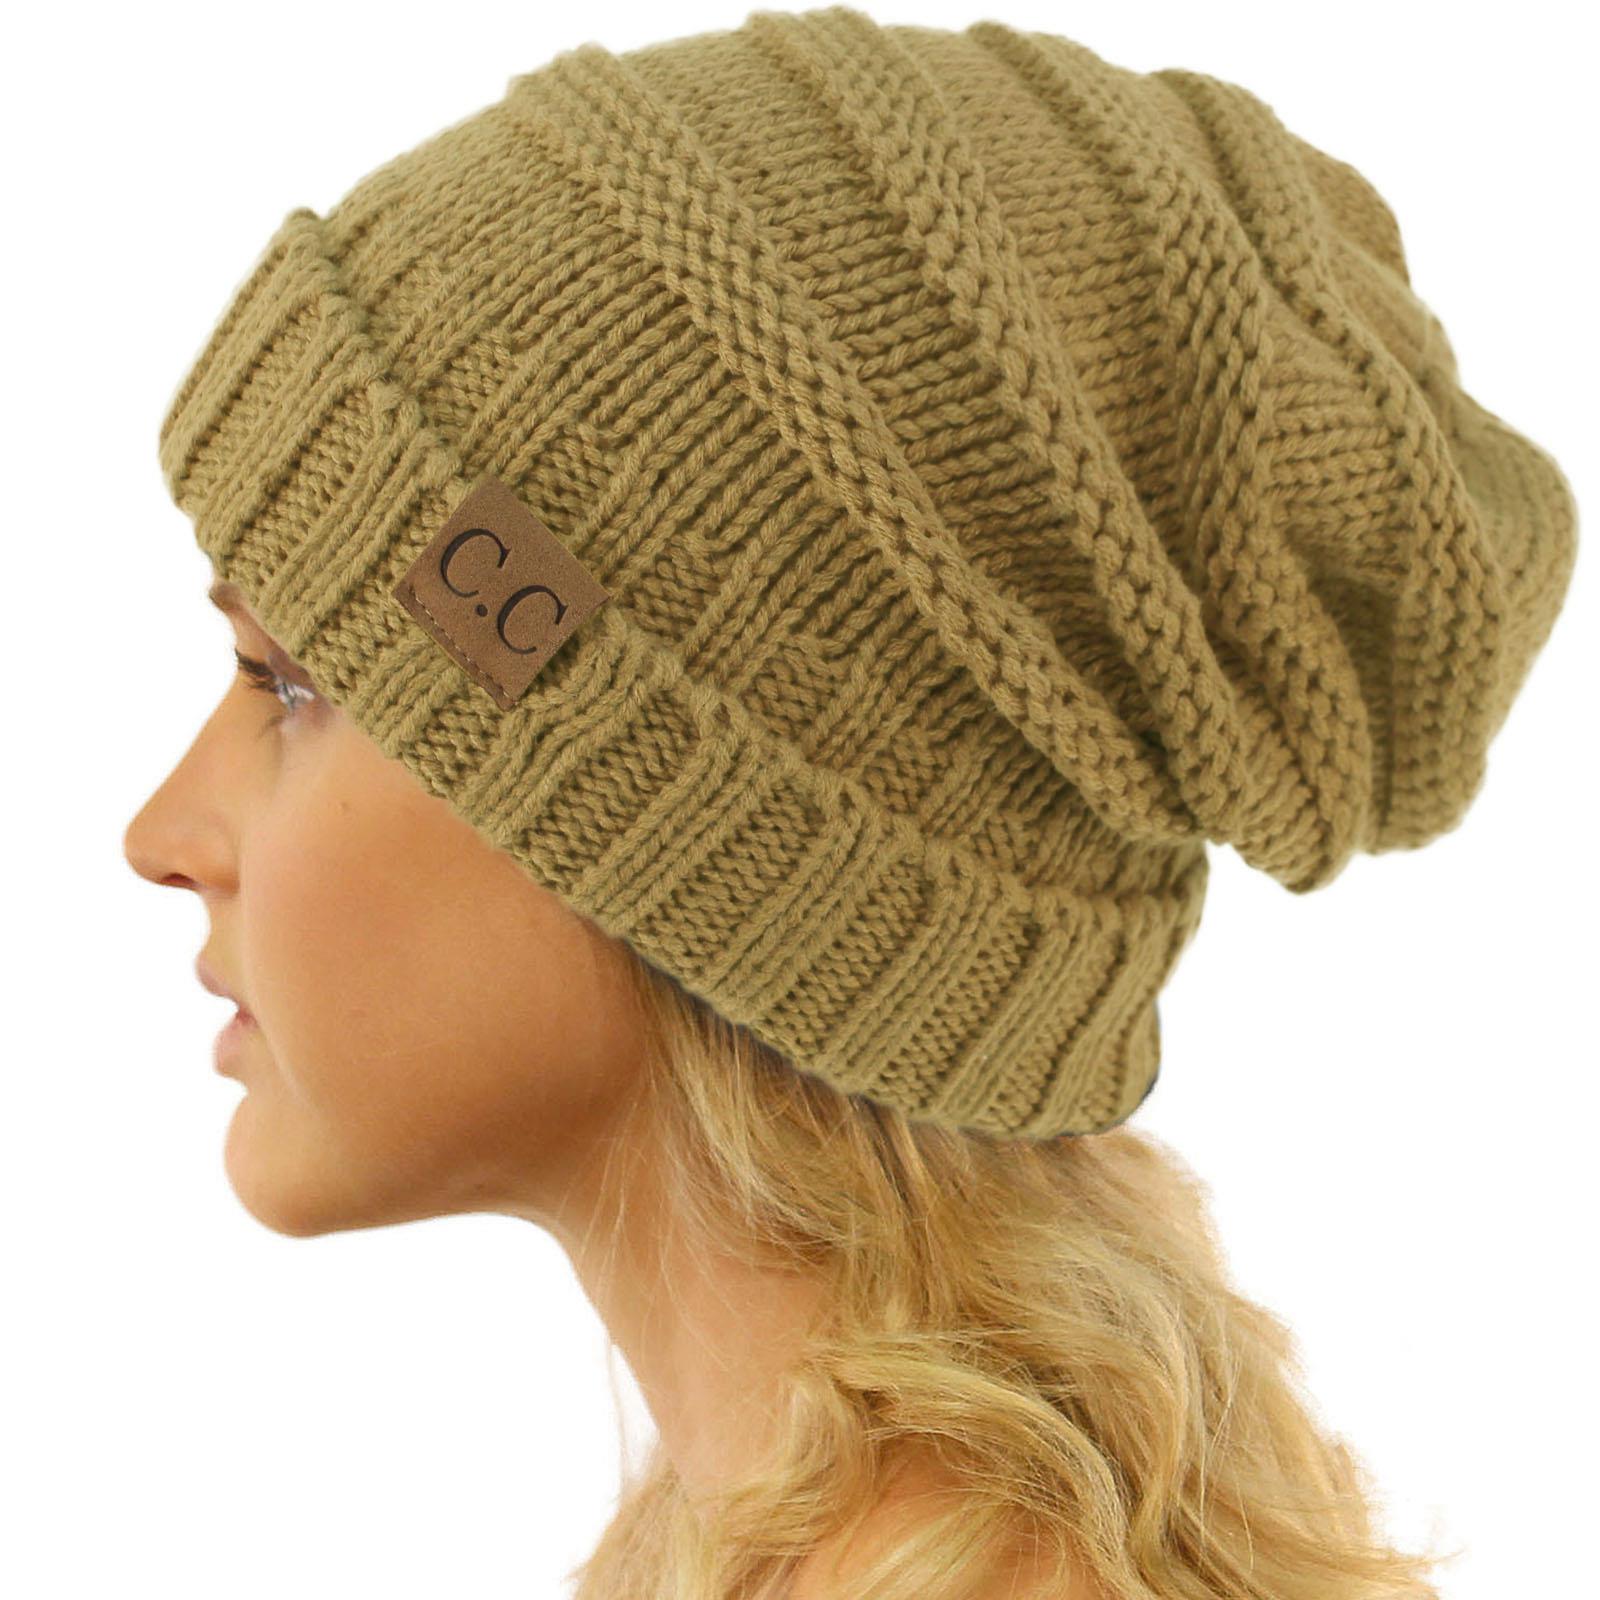 CC Winter Trendy Warm Oversized Chunky Baggy Stretchy Slouchy Skully Beanie Hat - image 1 of 2